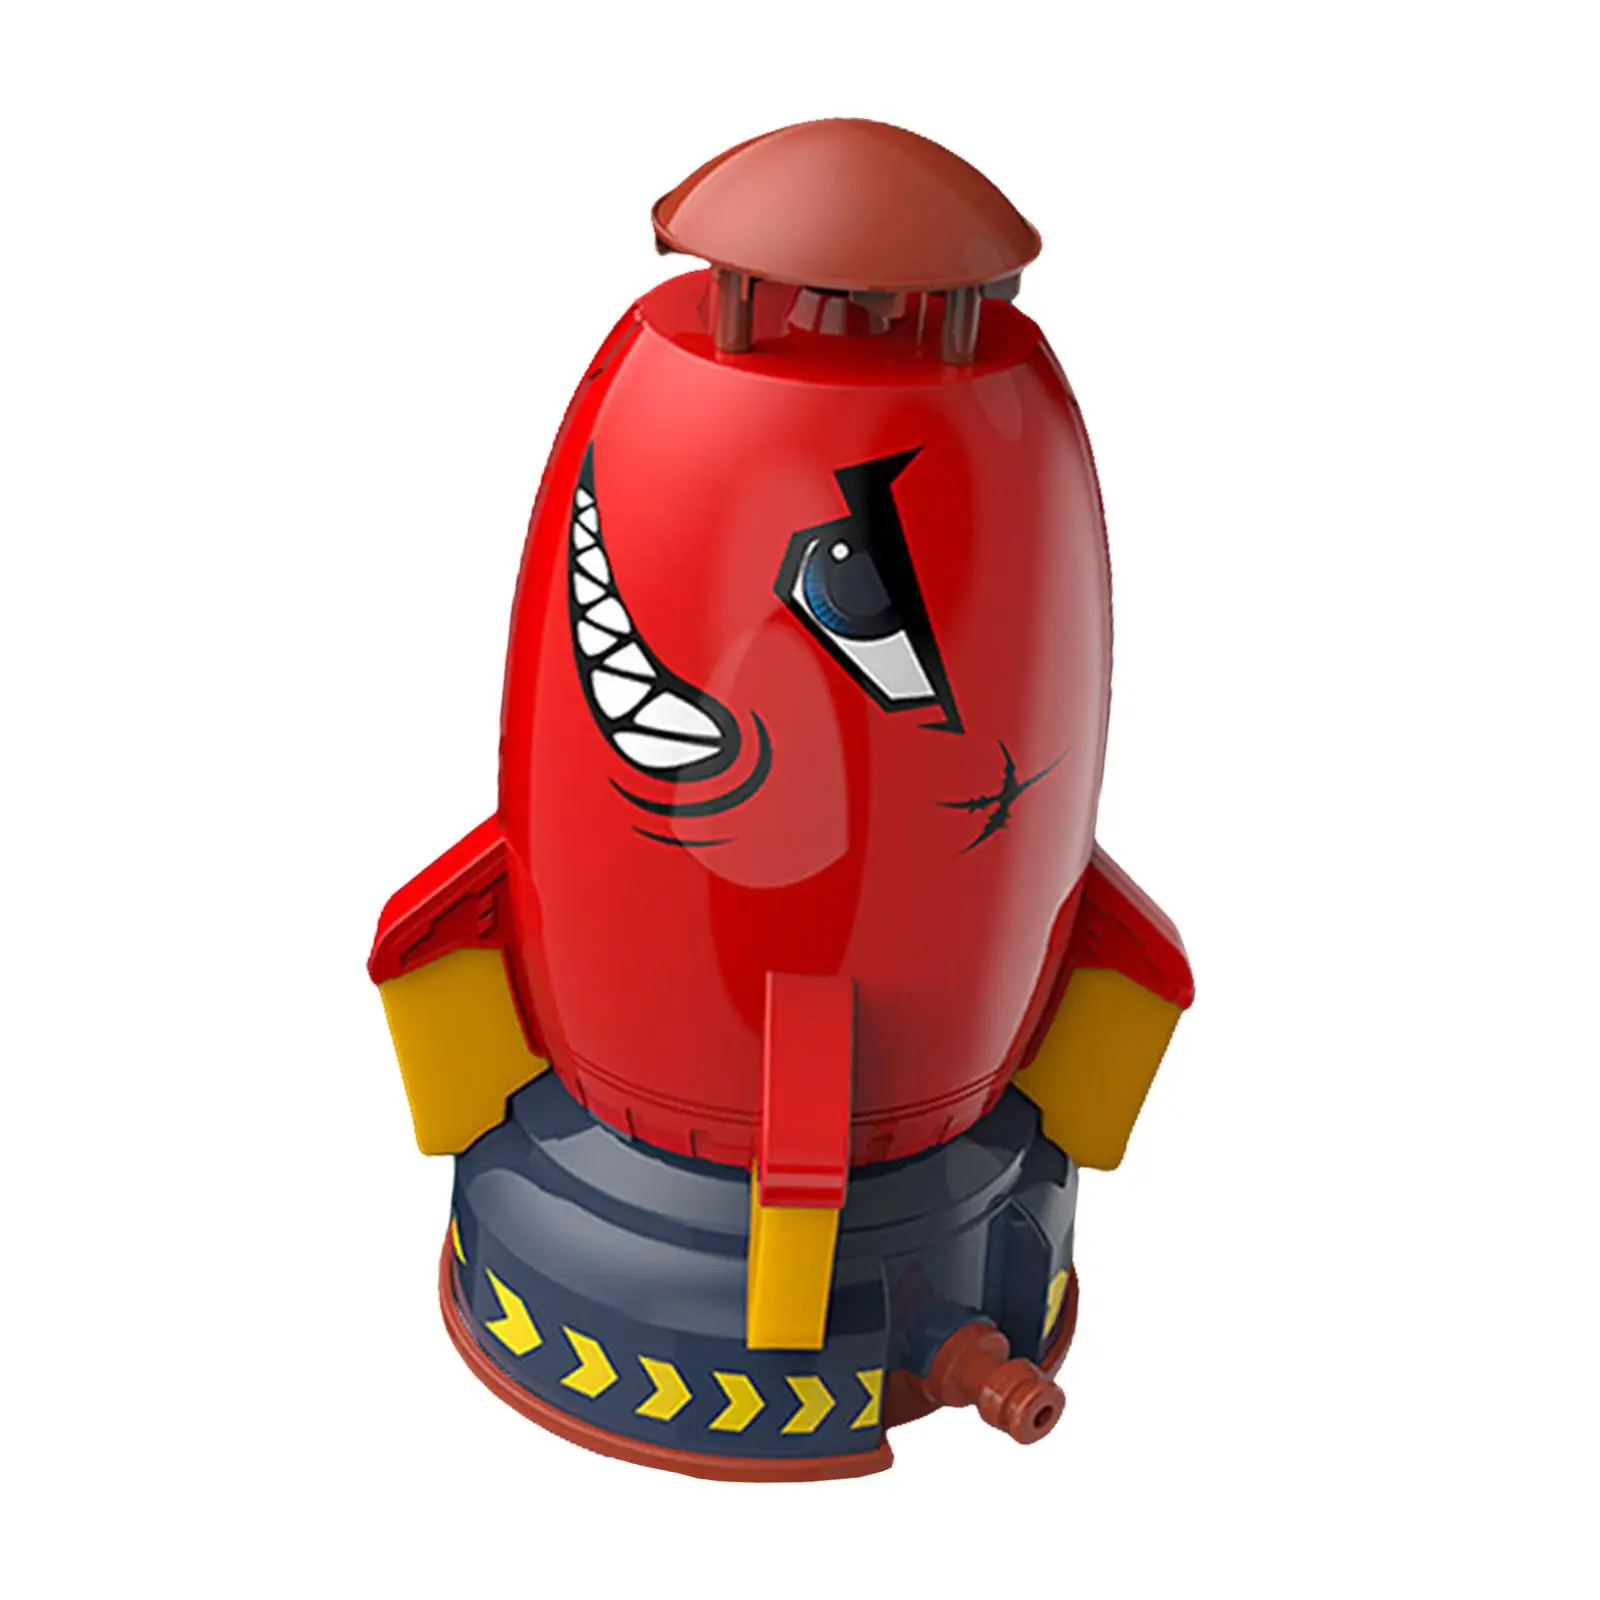 Space Rocket Sprinkler Rocket Shaped Pool Toy Summer Toy for Kids baby gifts